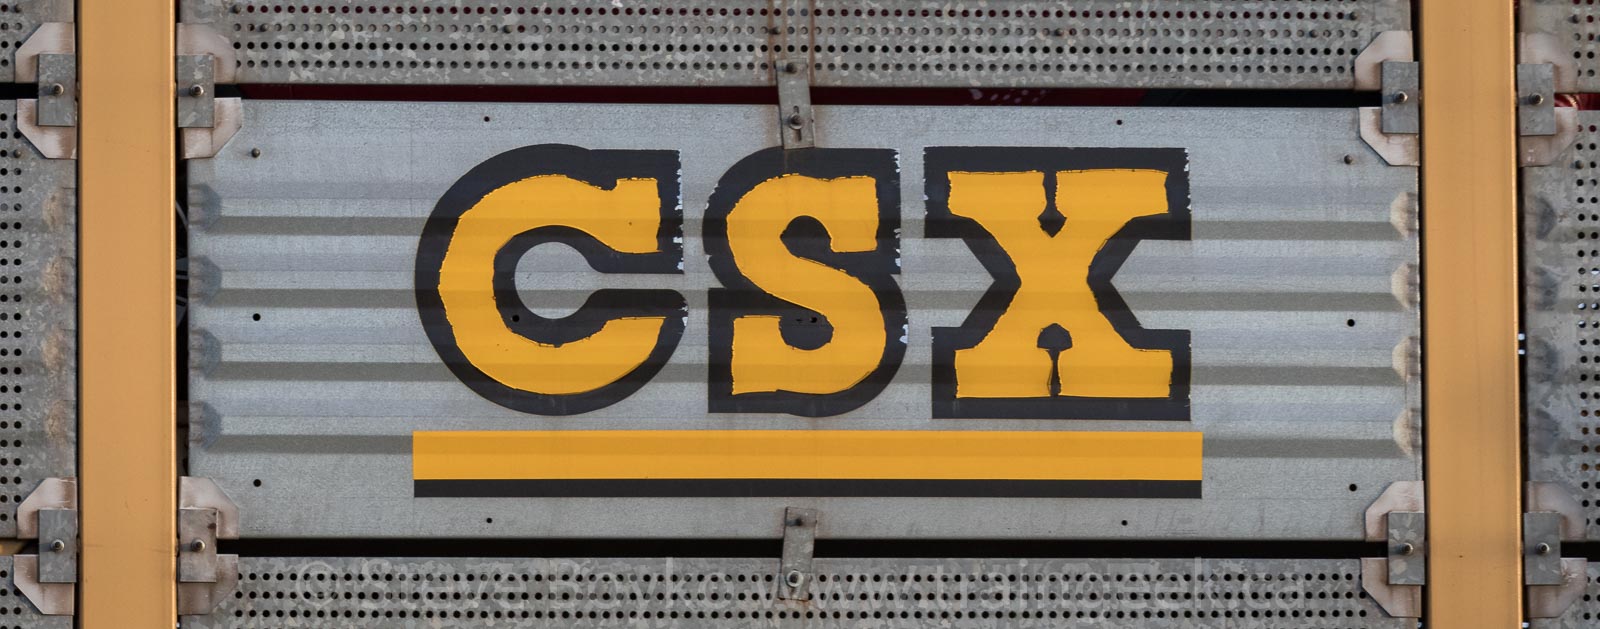 Confessions of a Train Geek: Logos Galore